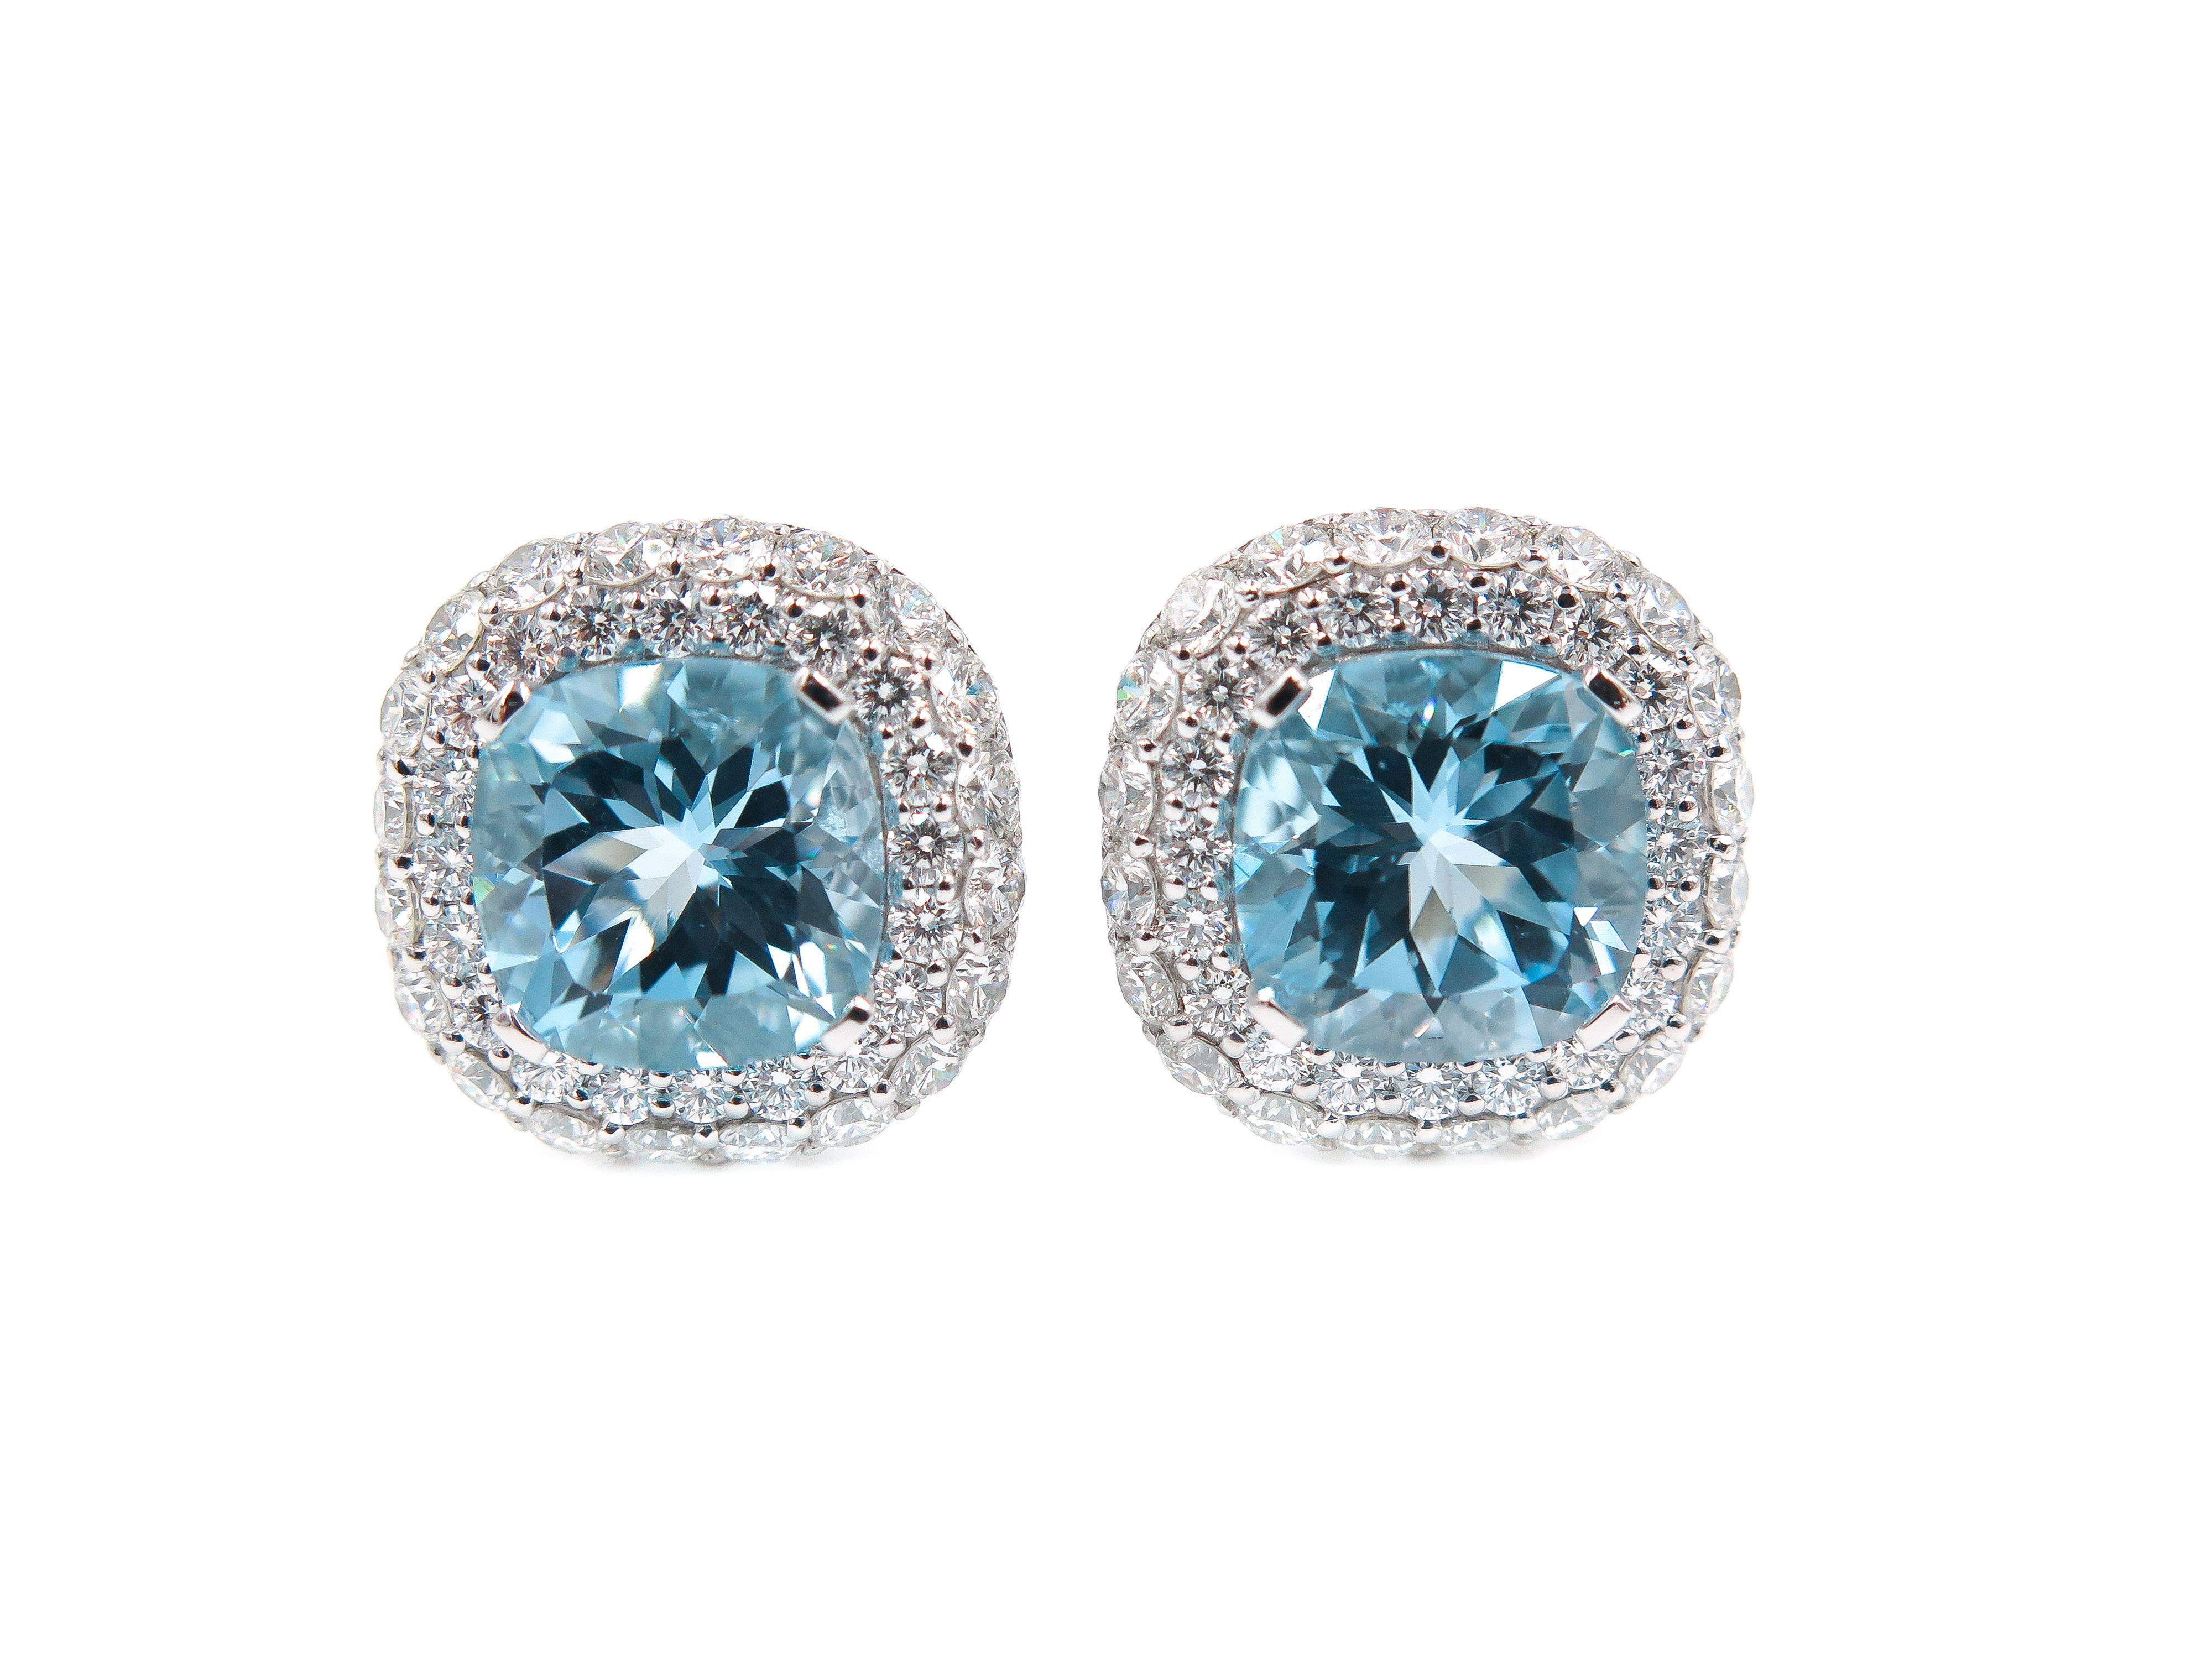 Designed by Leo Pizzo and entirely handmade by experienced master craftsman this pair of Blue Topaz and Diamond Earrings are stunningly beautiful!!
The 18K white gold enhances the brilliance of the 3.21 carats of white diamonds set around the